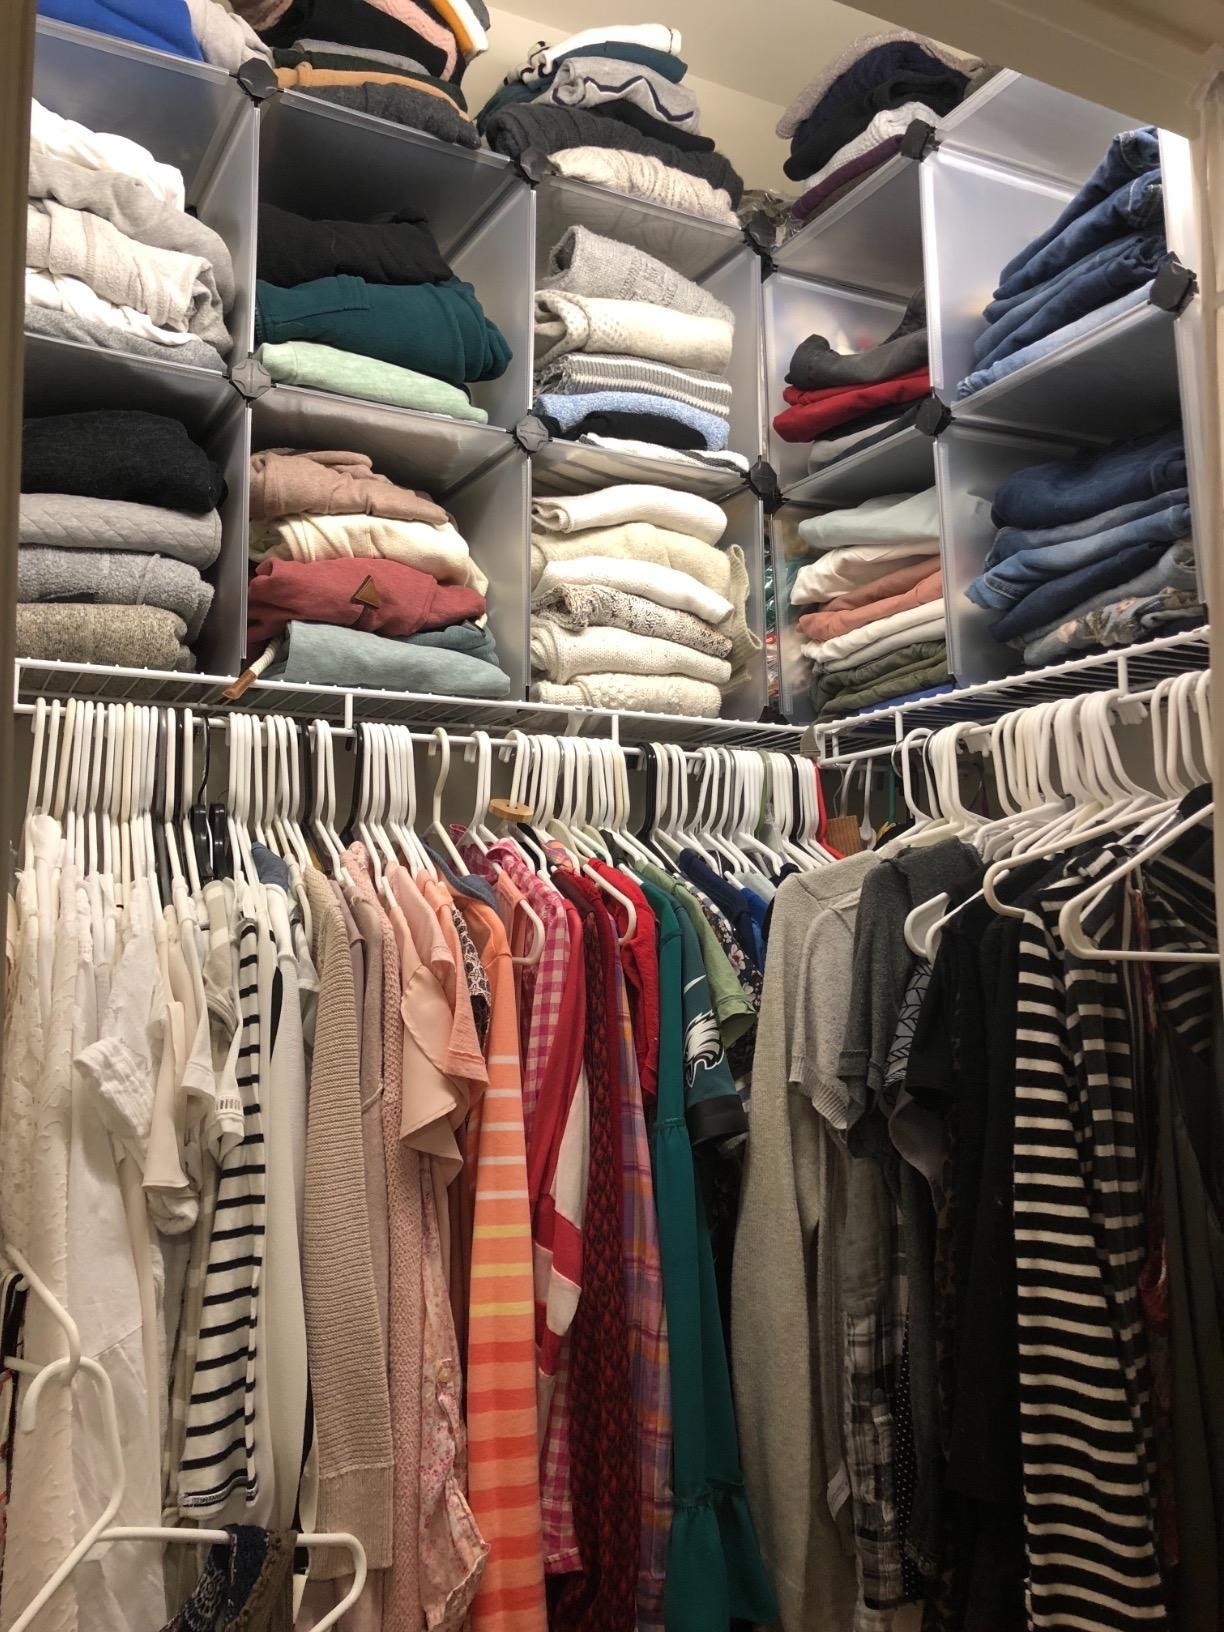 If Your Closet Is A Total Horror Show, These 32 Things Will Turn It Into An Organized Dream Come True